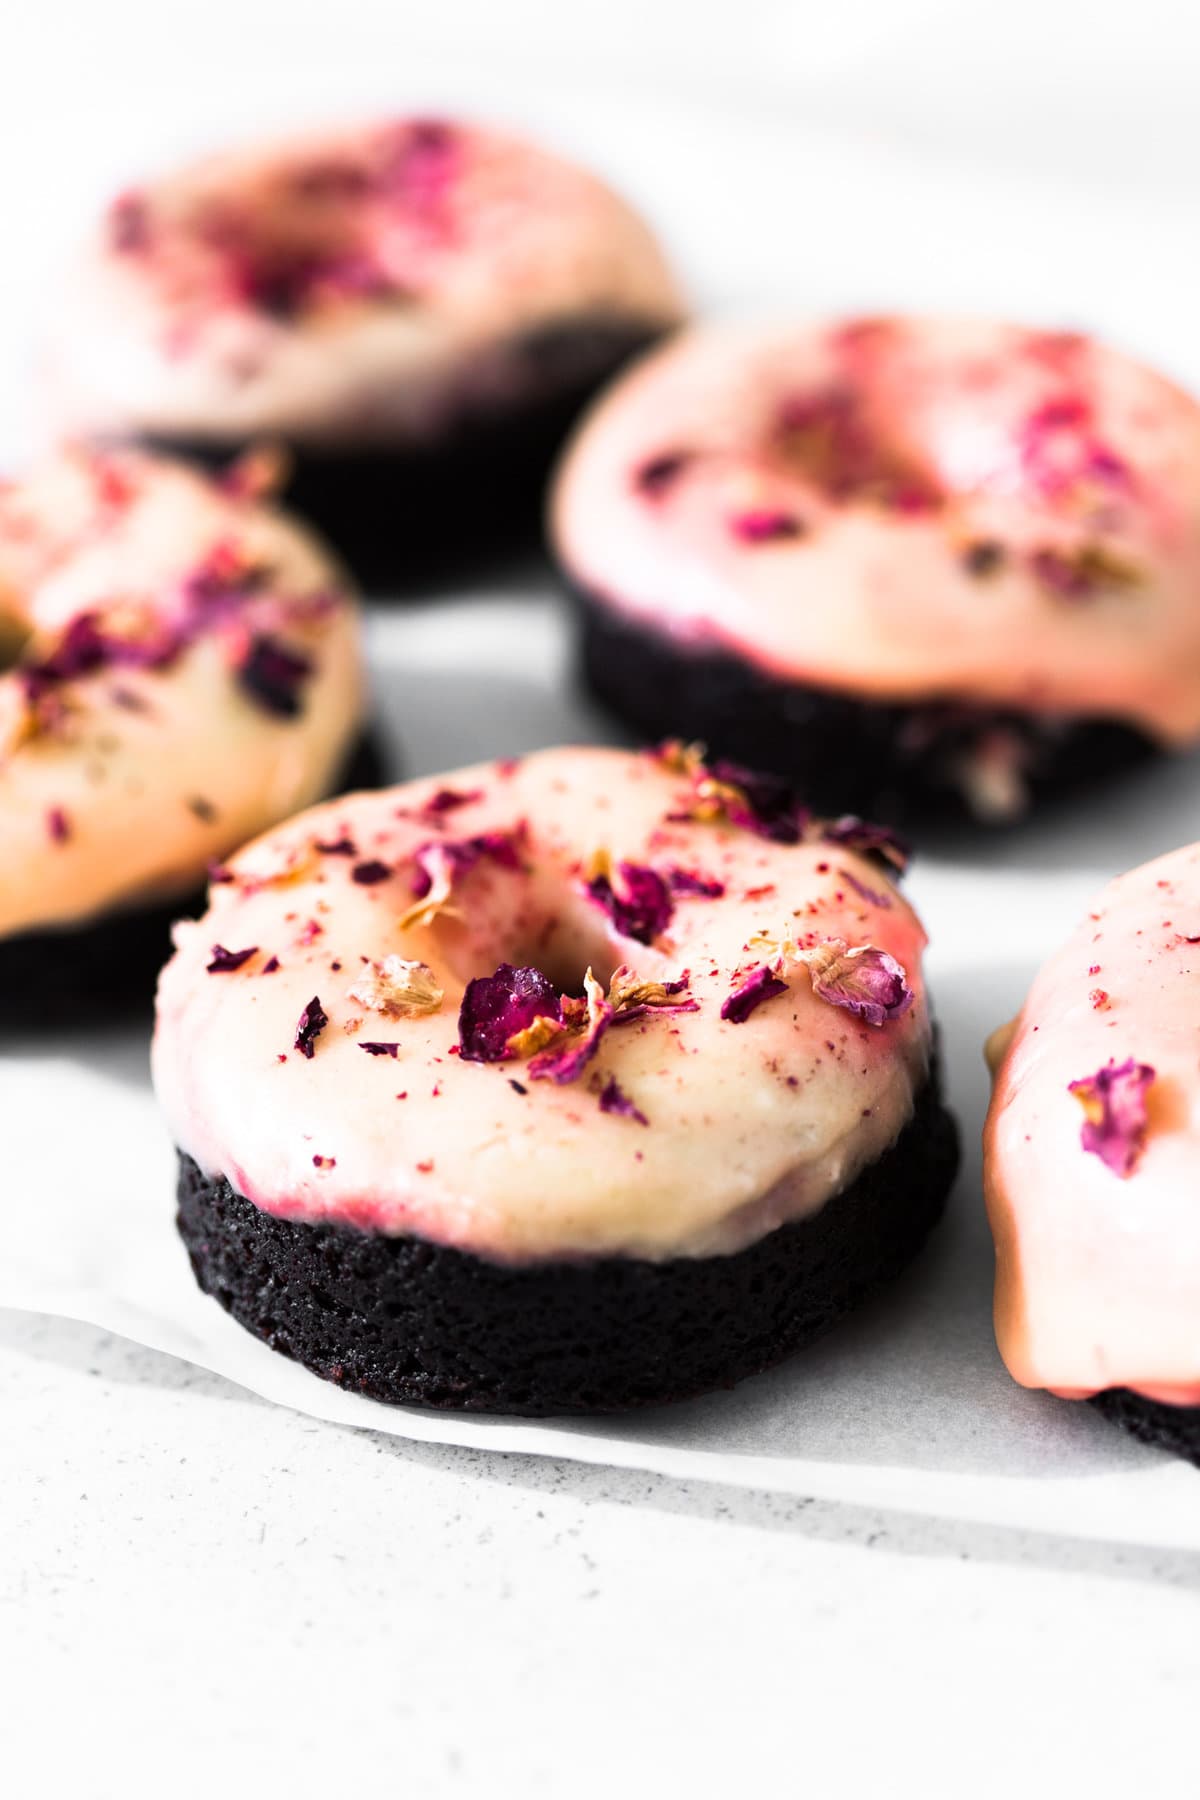 Moist and delicious Vegan Baked Chocolate Donuts topped with a floral Rose Glaze. Easy to make and ready in under 30 minutes. #donuts #vegandonuts #cakedonuts #bakeddonuts #turkishdelight #chocolate #chocolatedonuts #baking #vegetarian #chocolatecake #easy #30minutes